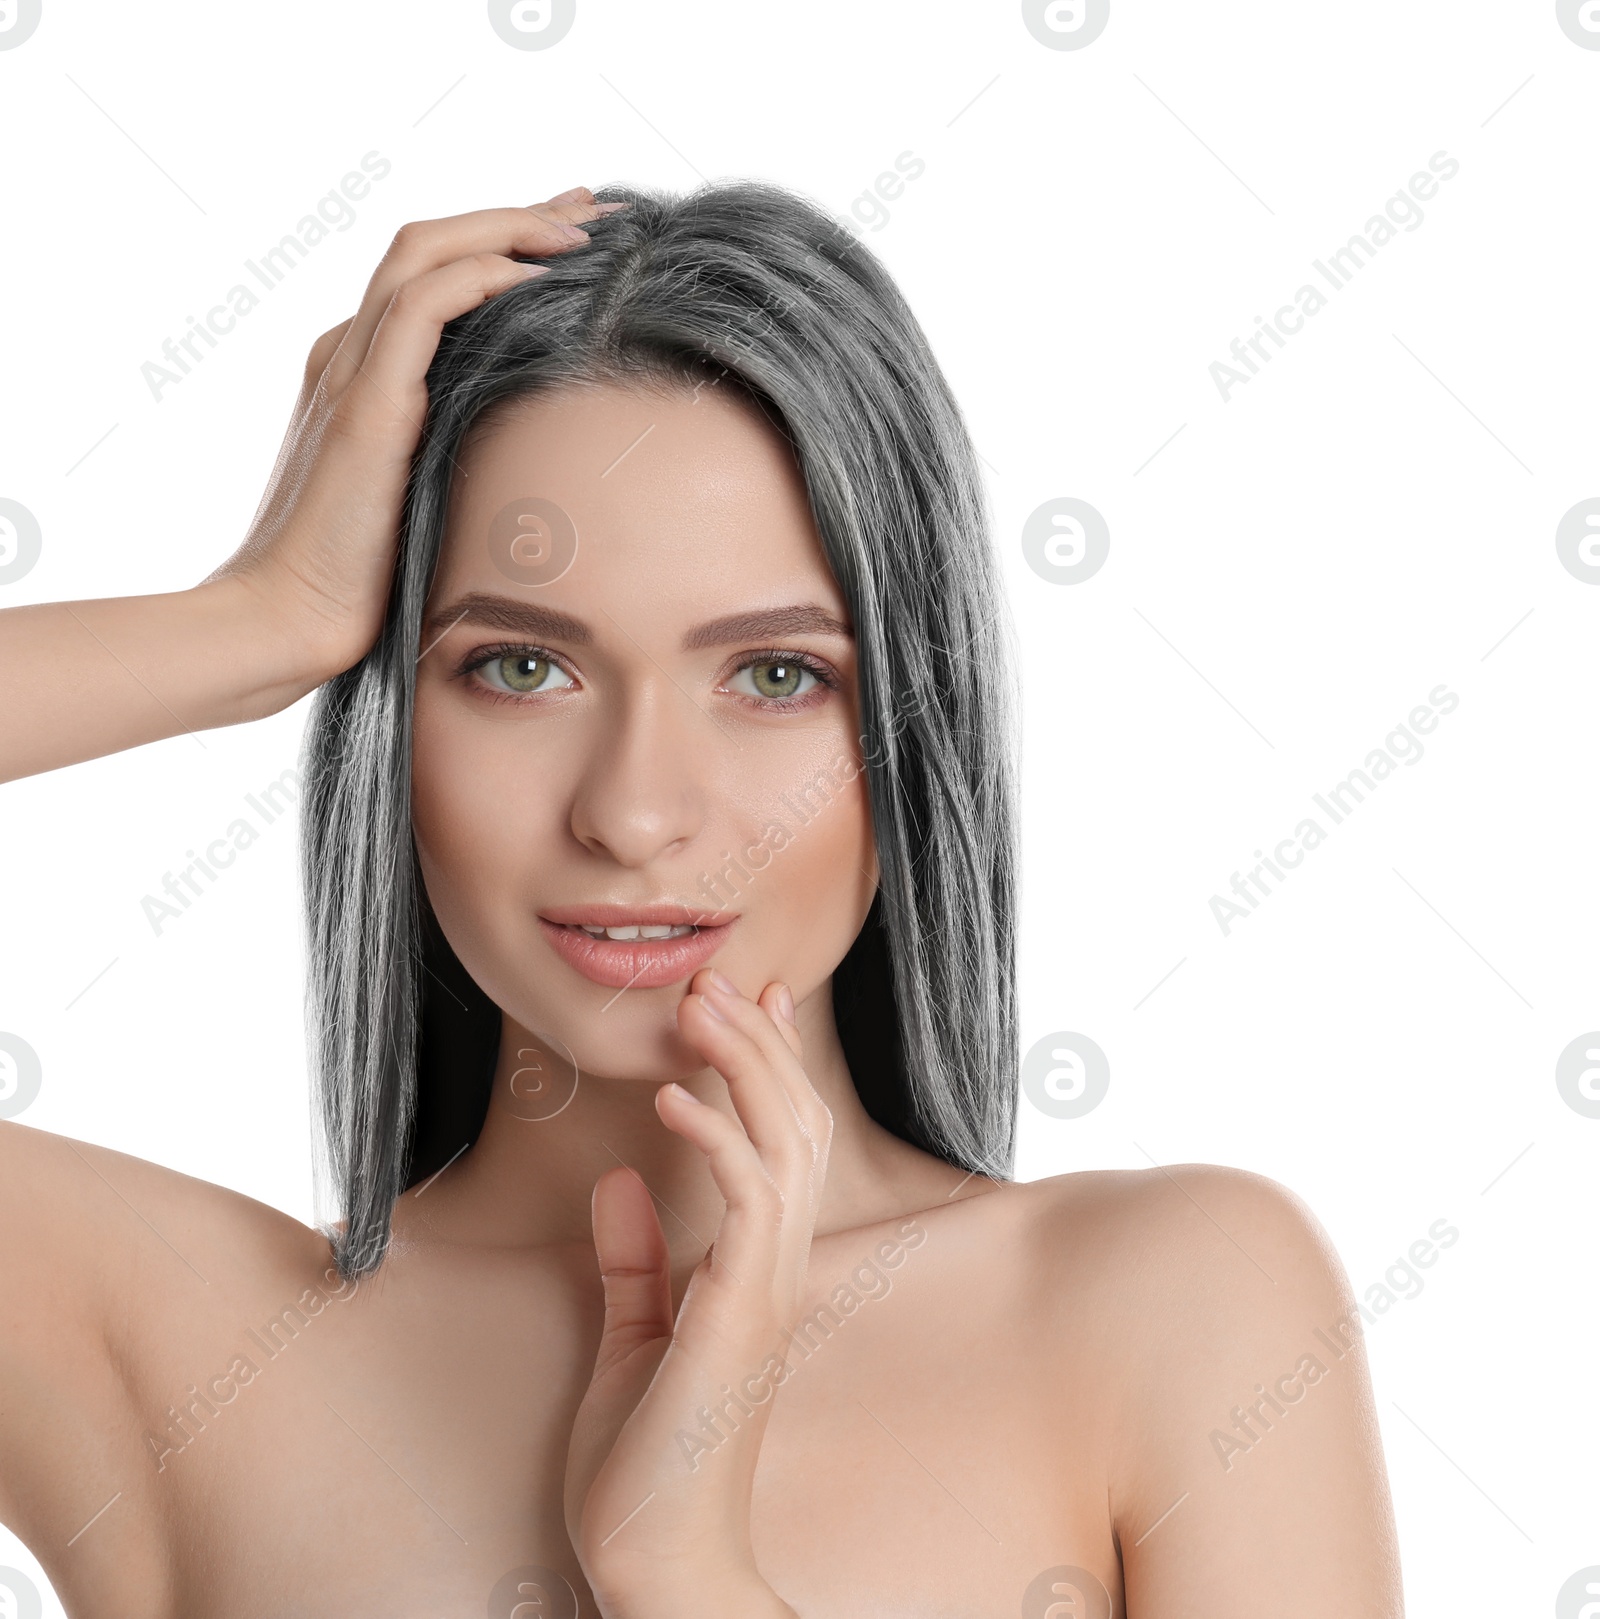 Image of Portrait of young woman with beautiful grey colored hair on white background